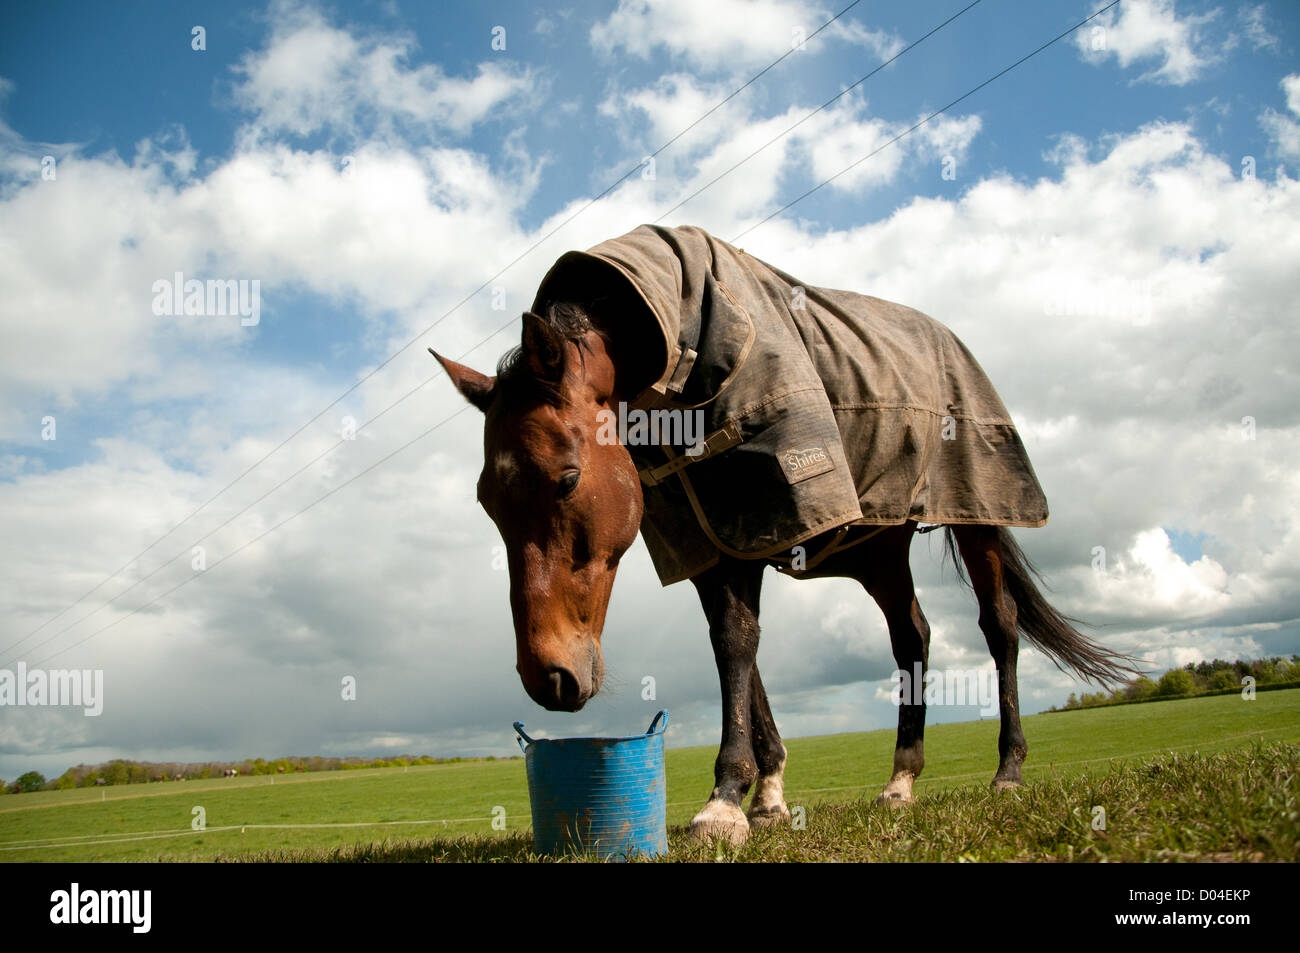 Landscape portrait of a horse eating its feed from a blue feed bucket. Image is set on a green pasture and blue sky/ cloudscape Stock Photo